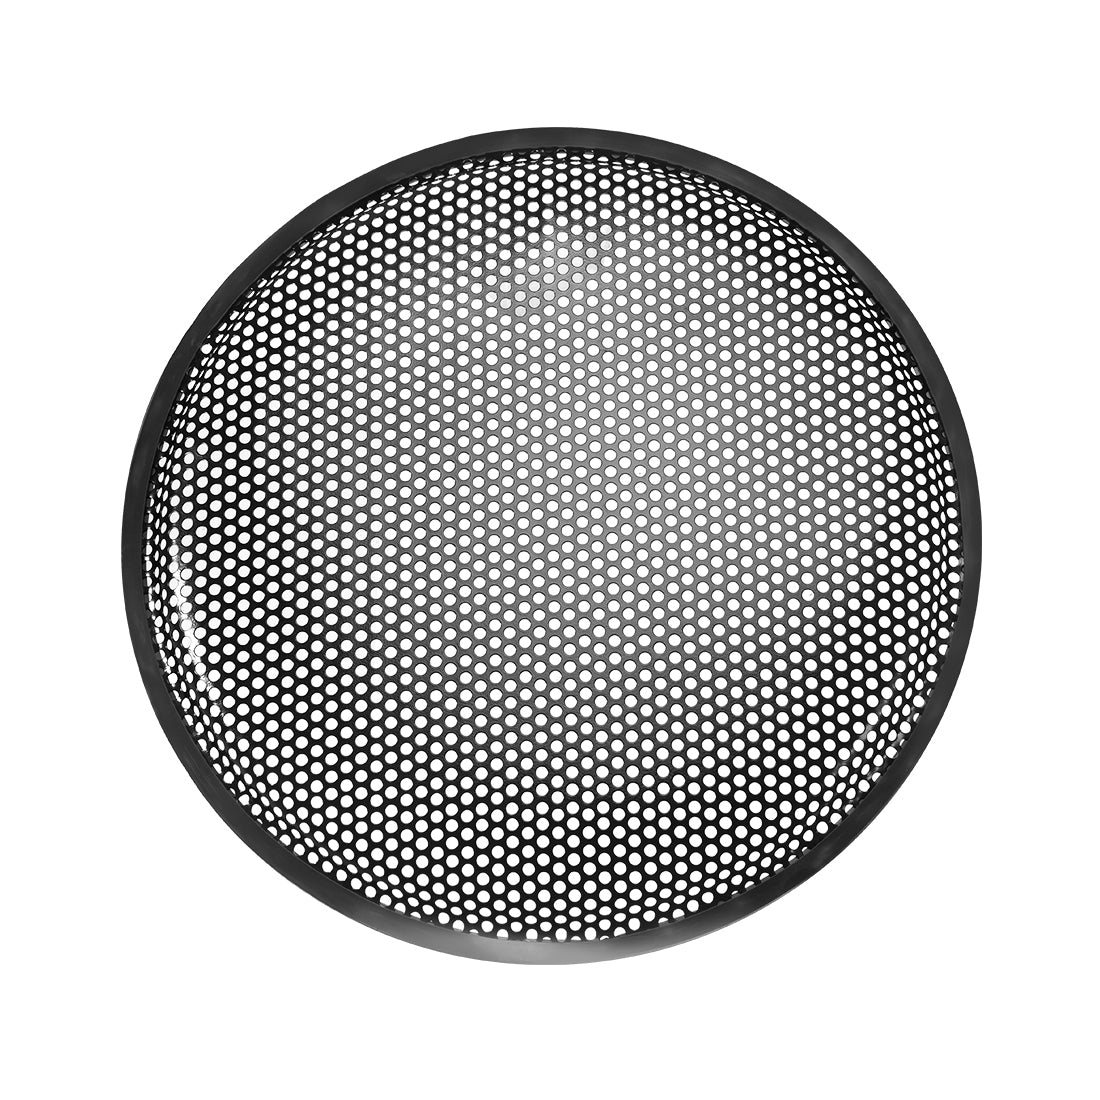 uxcell Uxcell 12" Speaker Waffle Grill Metal Mesh Audio Subwoofer Guard Protector Cover with Clips,Screws